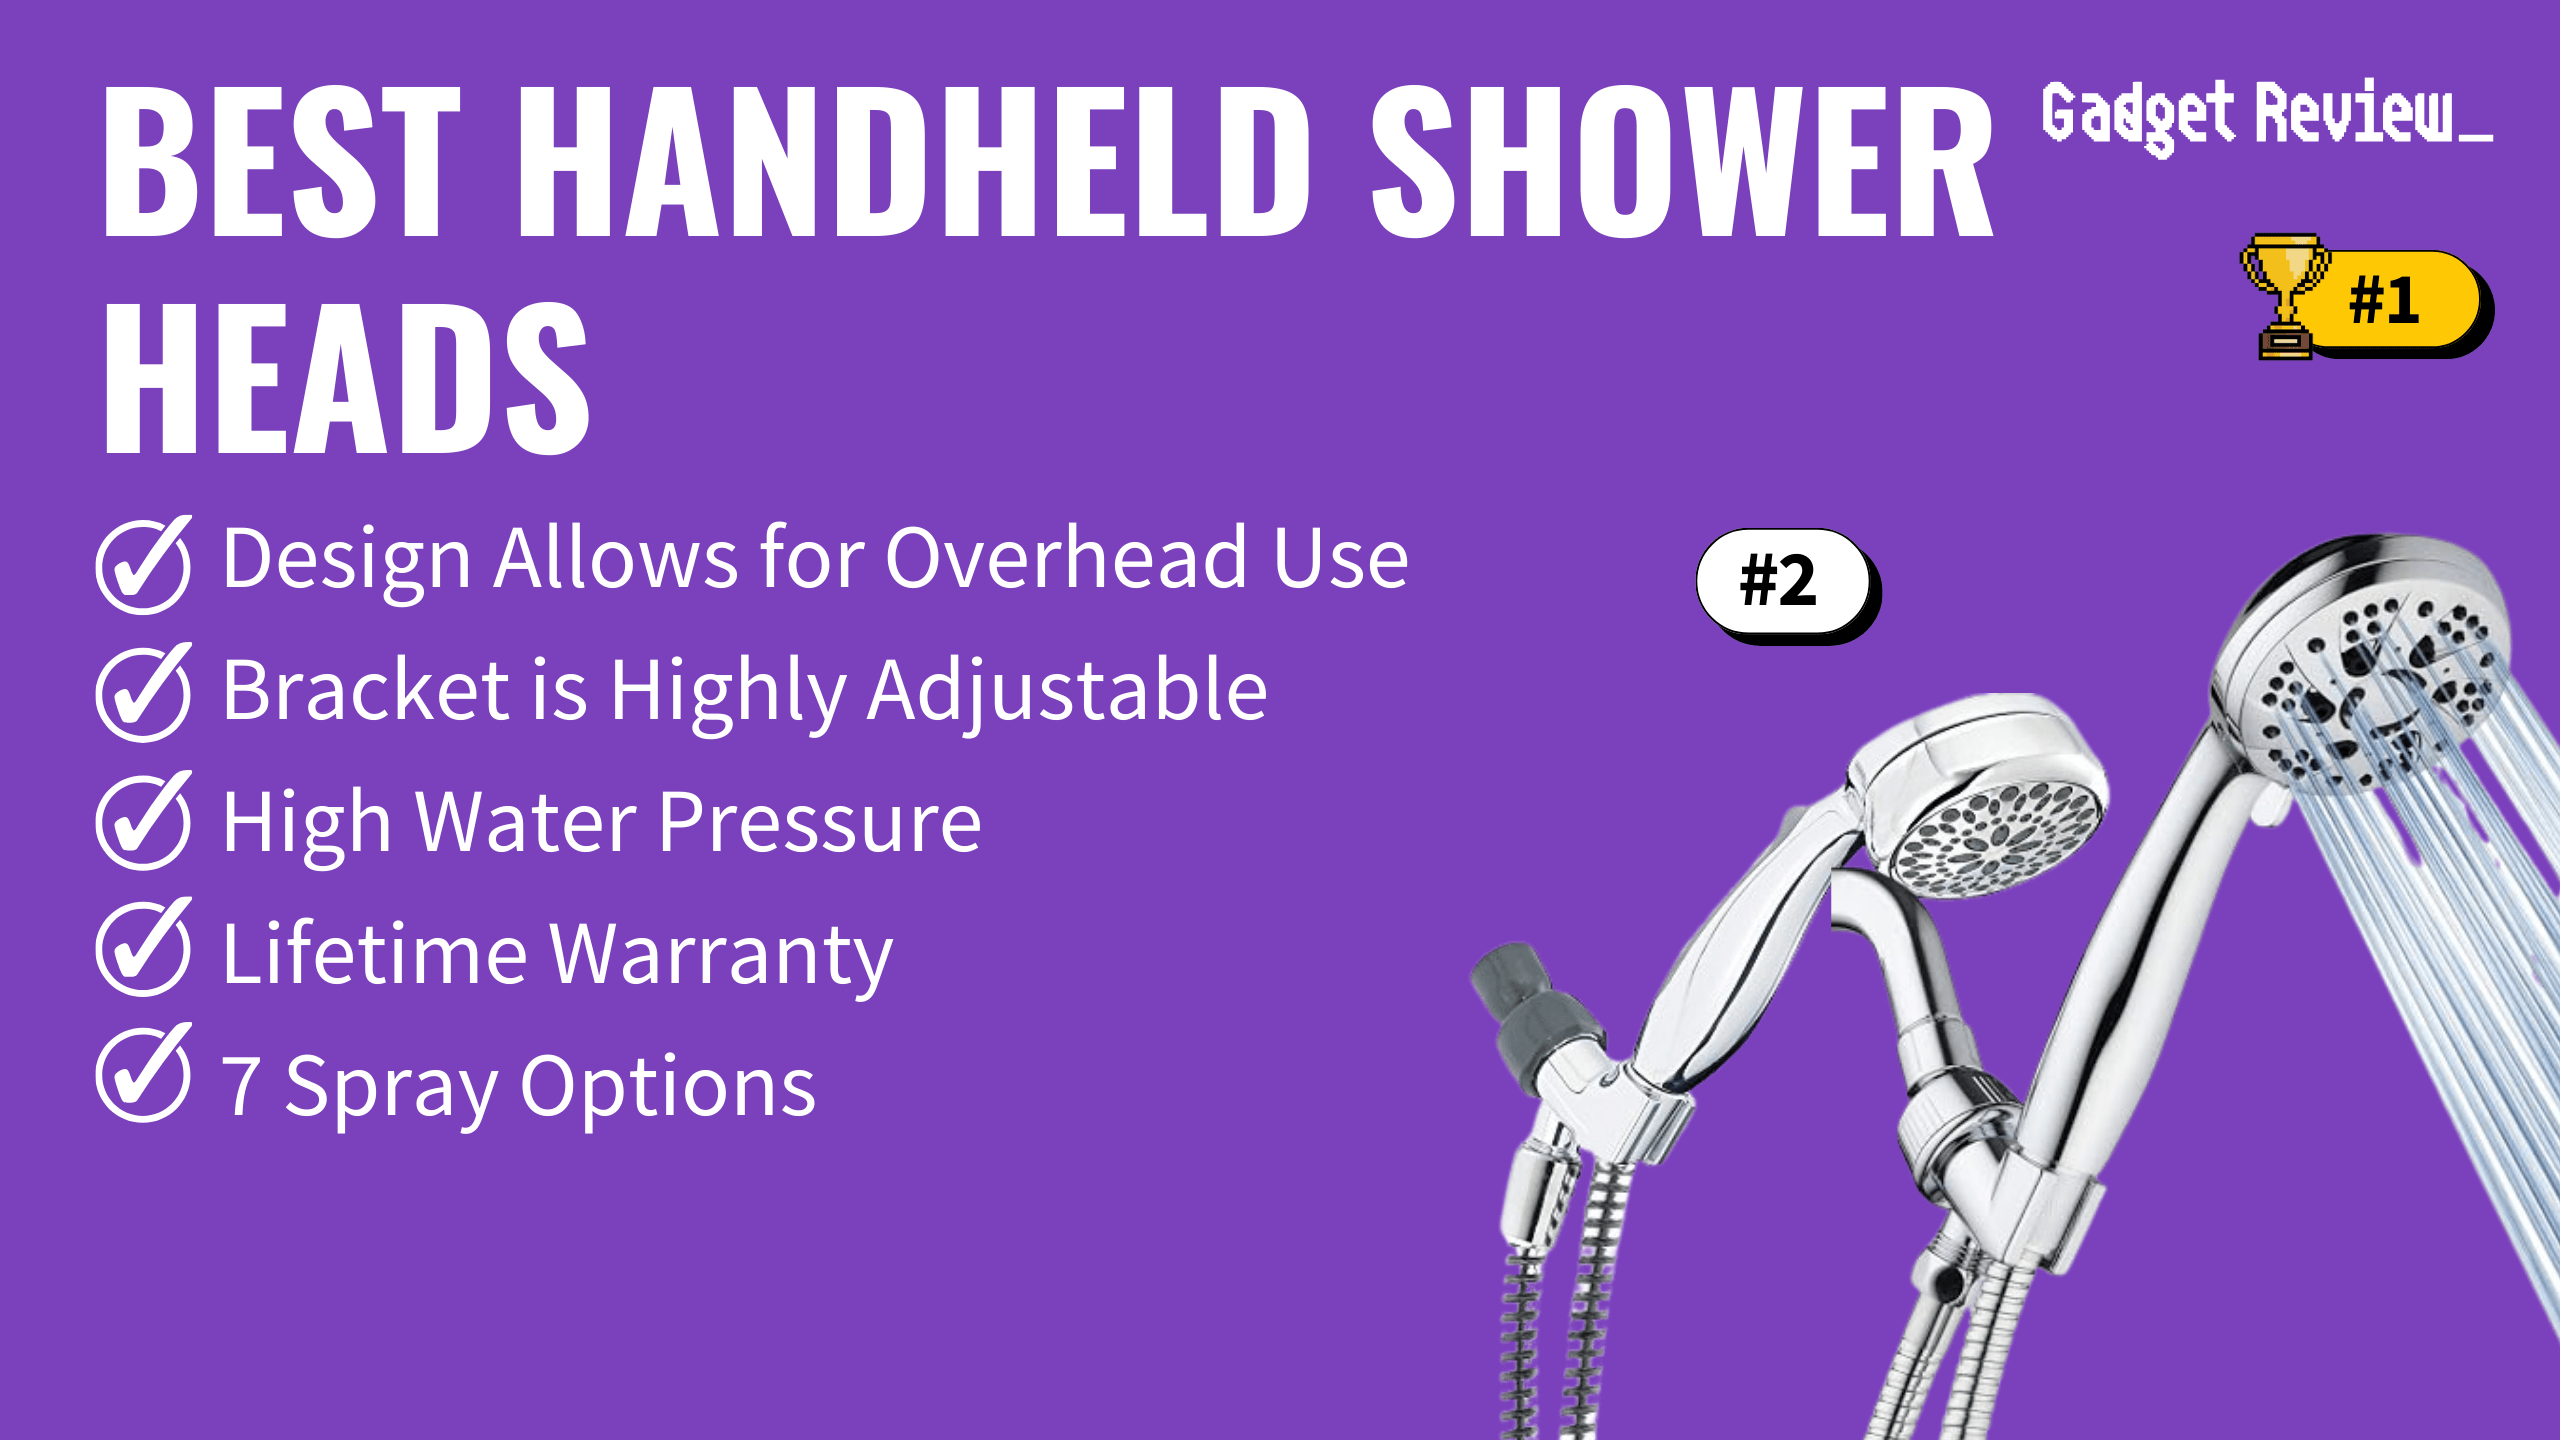 best handheld shower heads featured image that shows the top three best bathroom essential models